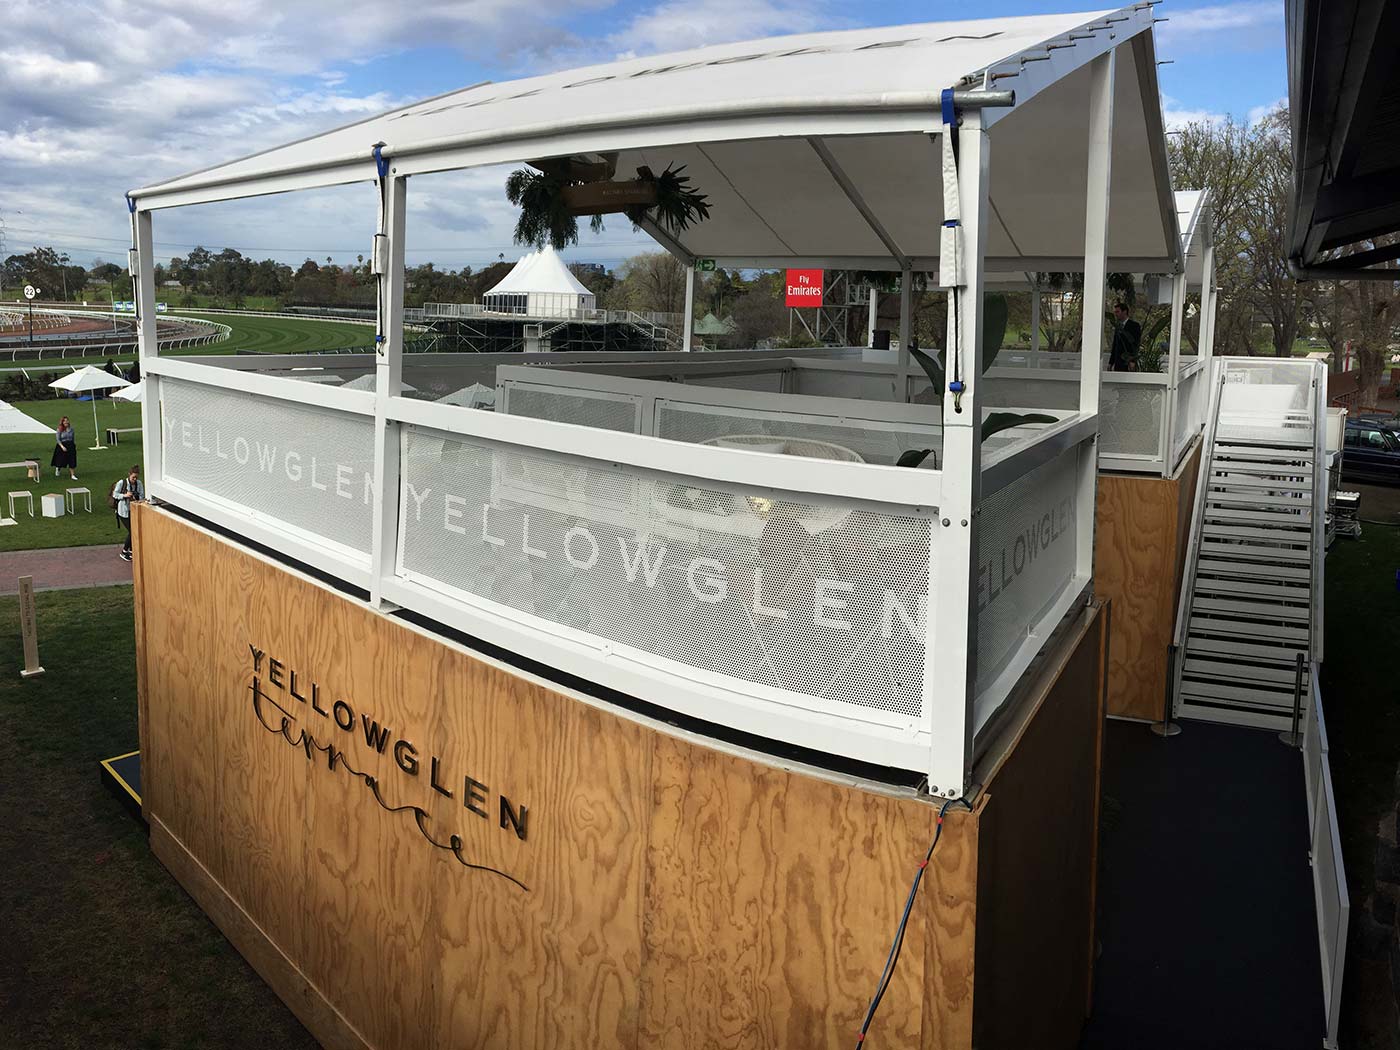 Yellowglen-Terrace-Shipping-Container-Hospitality-Activation-5